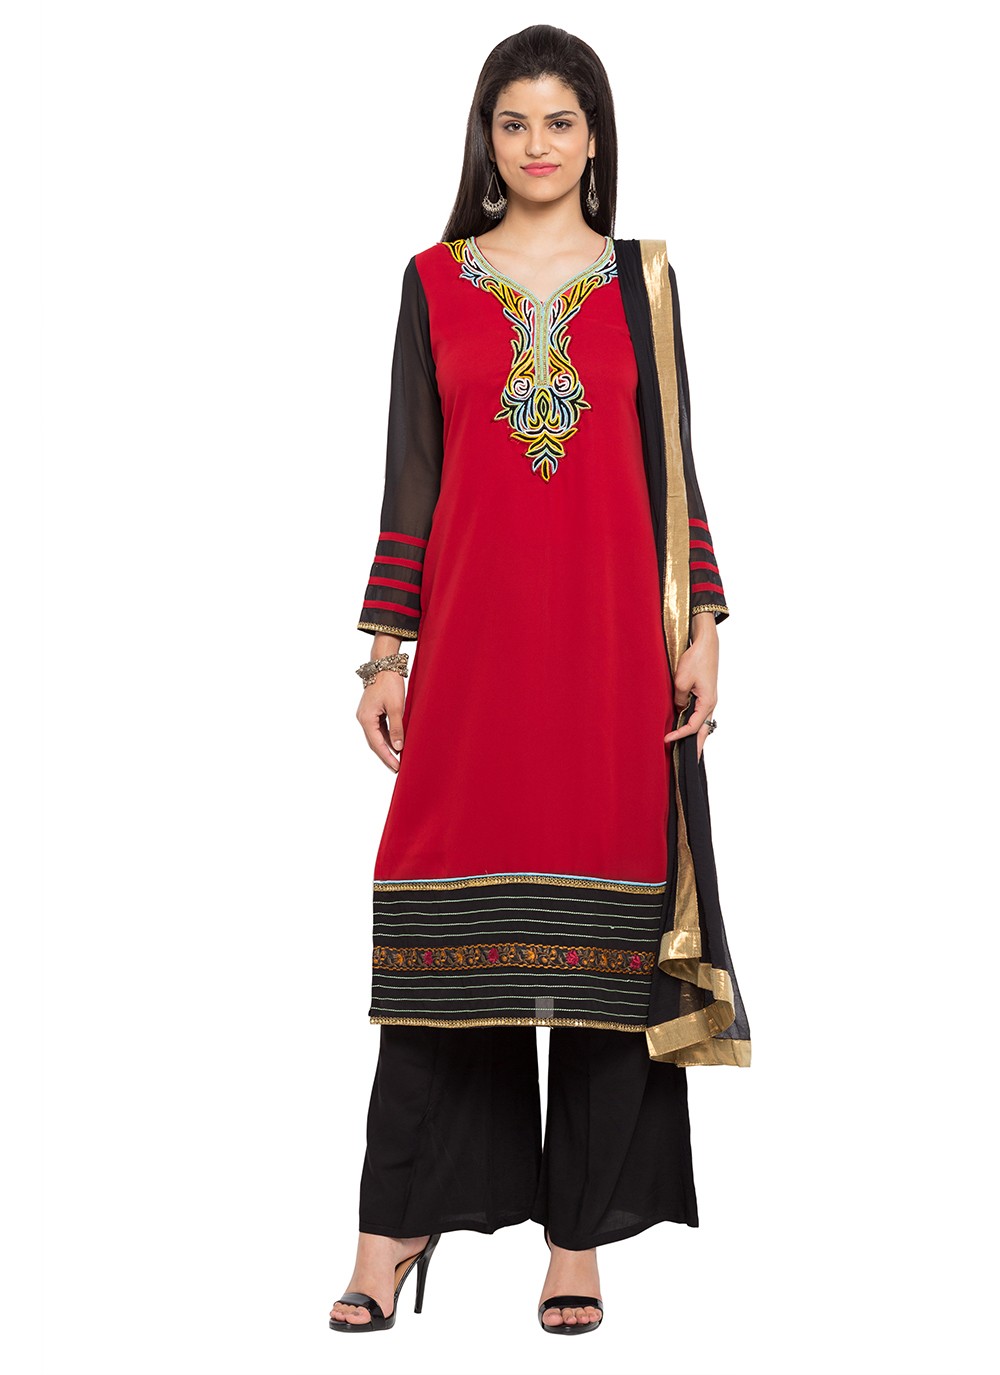 Embroidered Faux Georgette Red Readymade Salwar Kameez